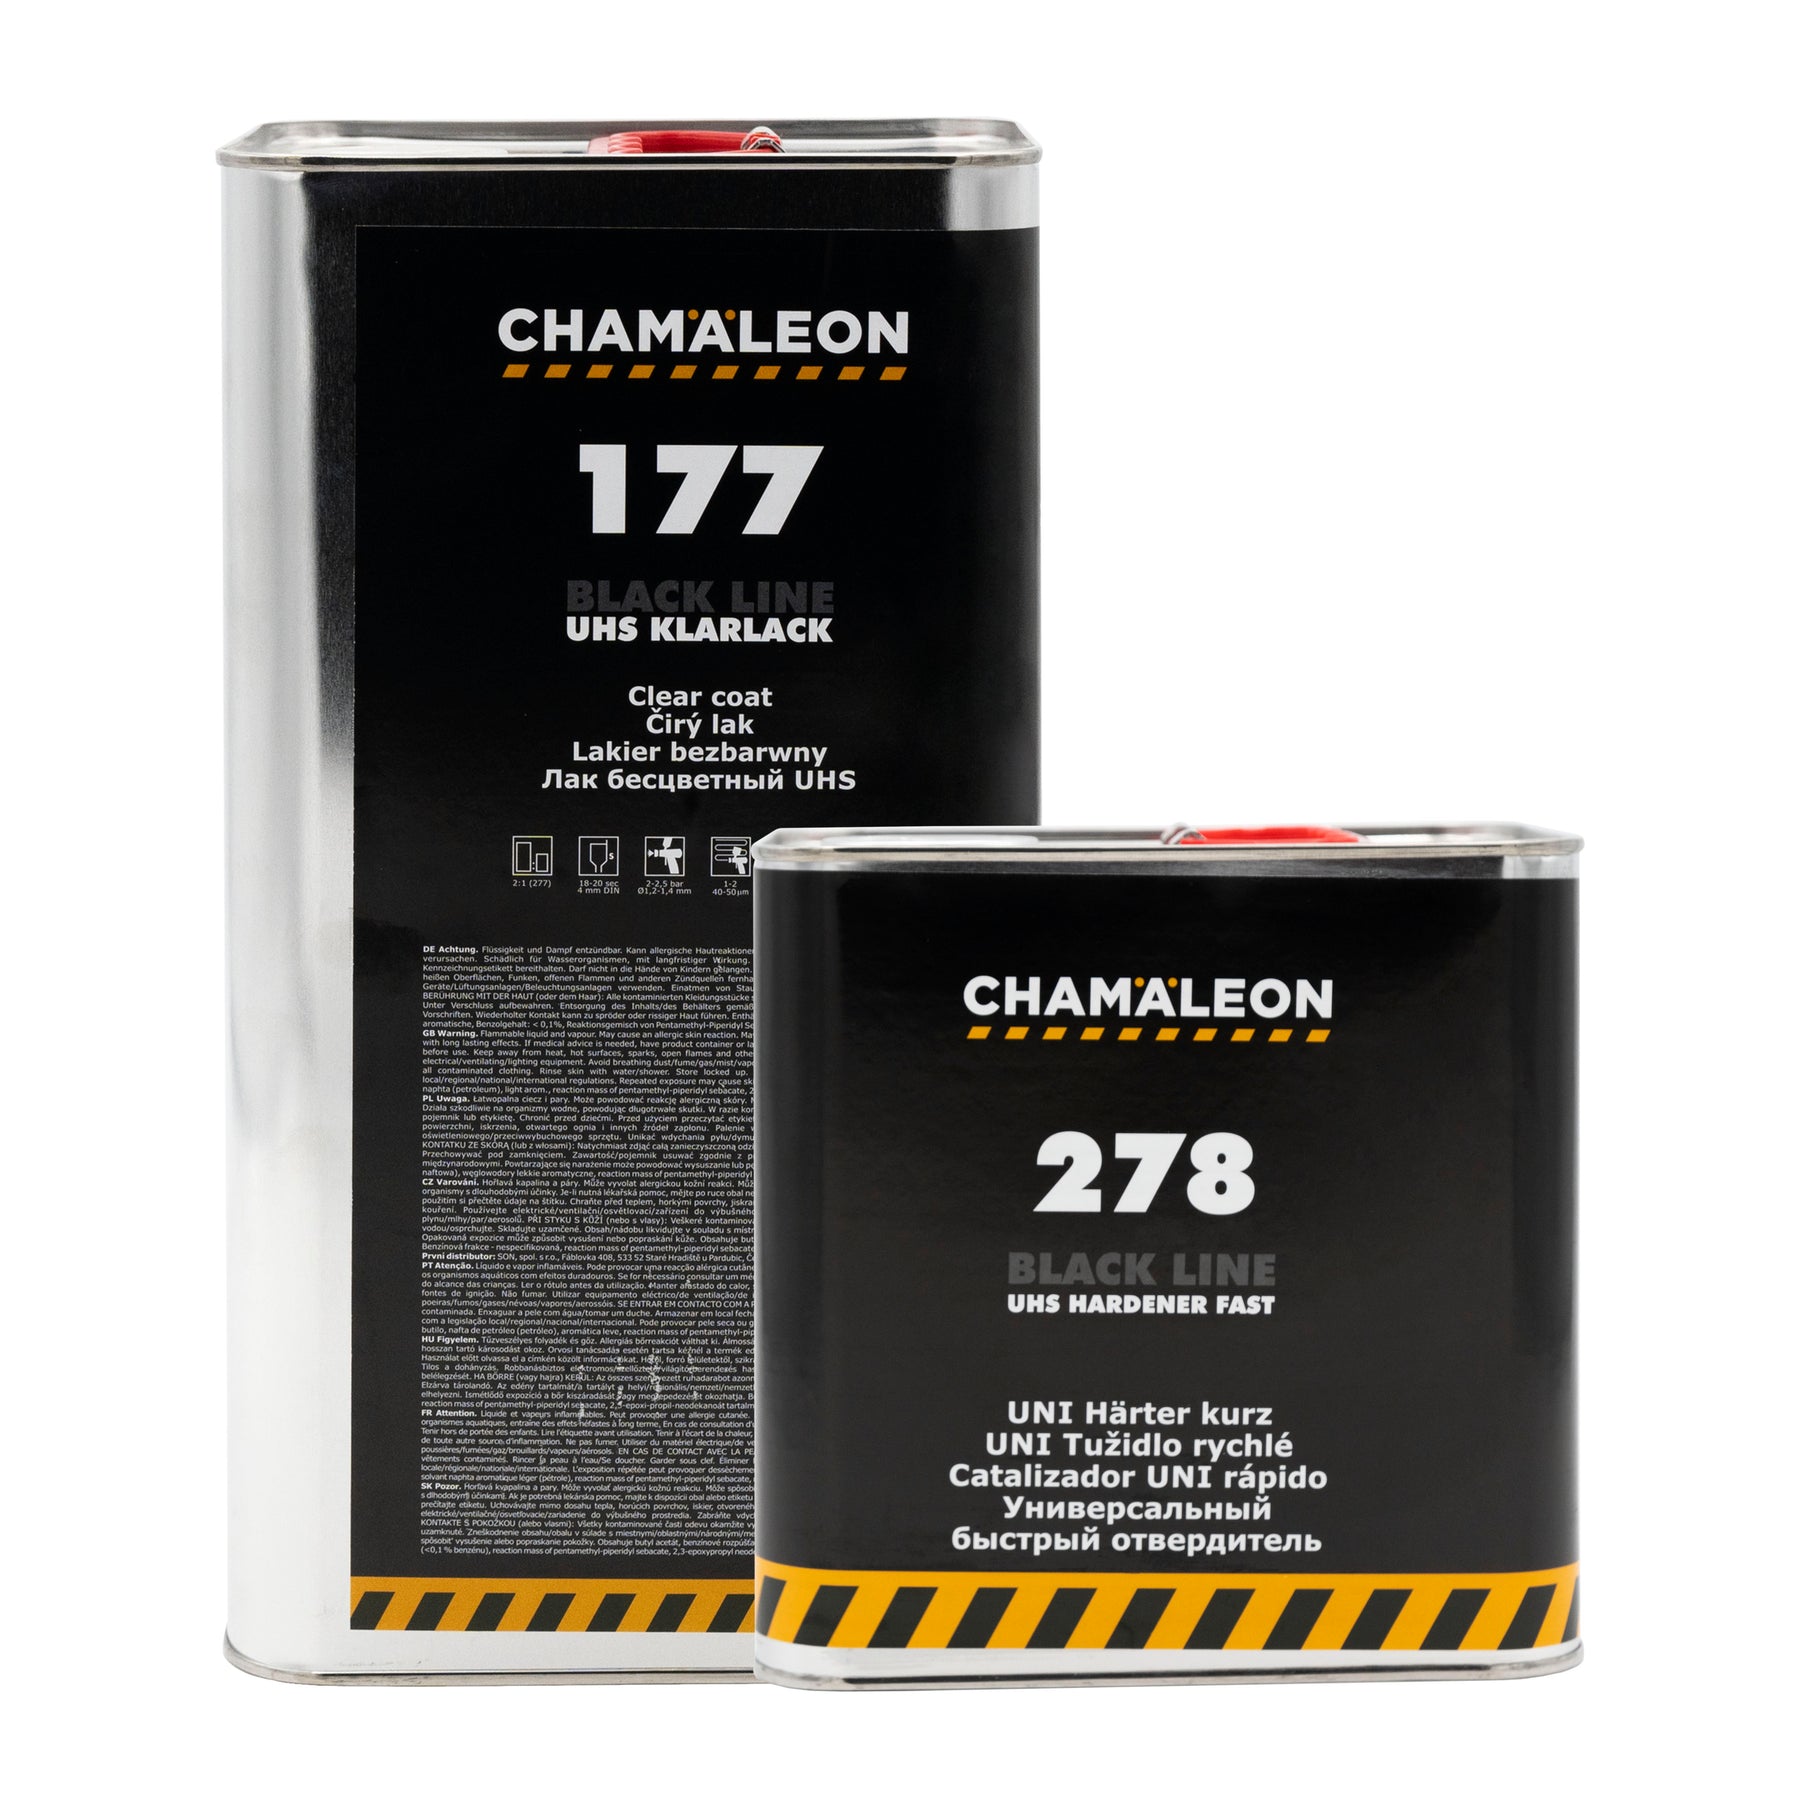 Chamaleon UHS 2K Clear Coat Scratch Proof 177 con catalizzatore